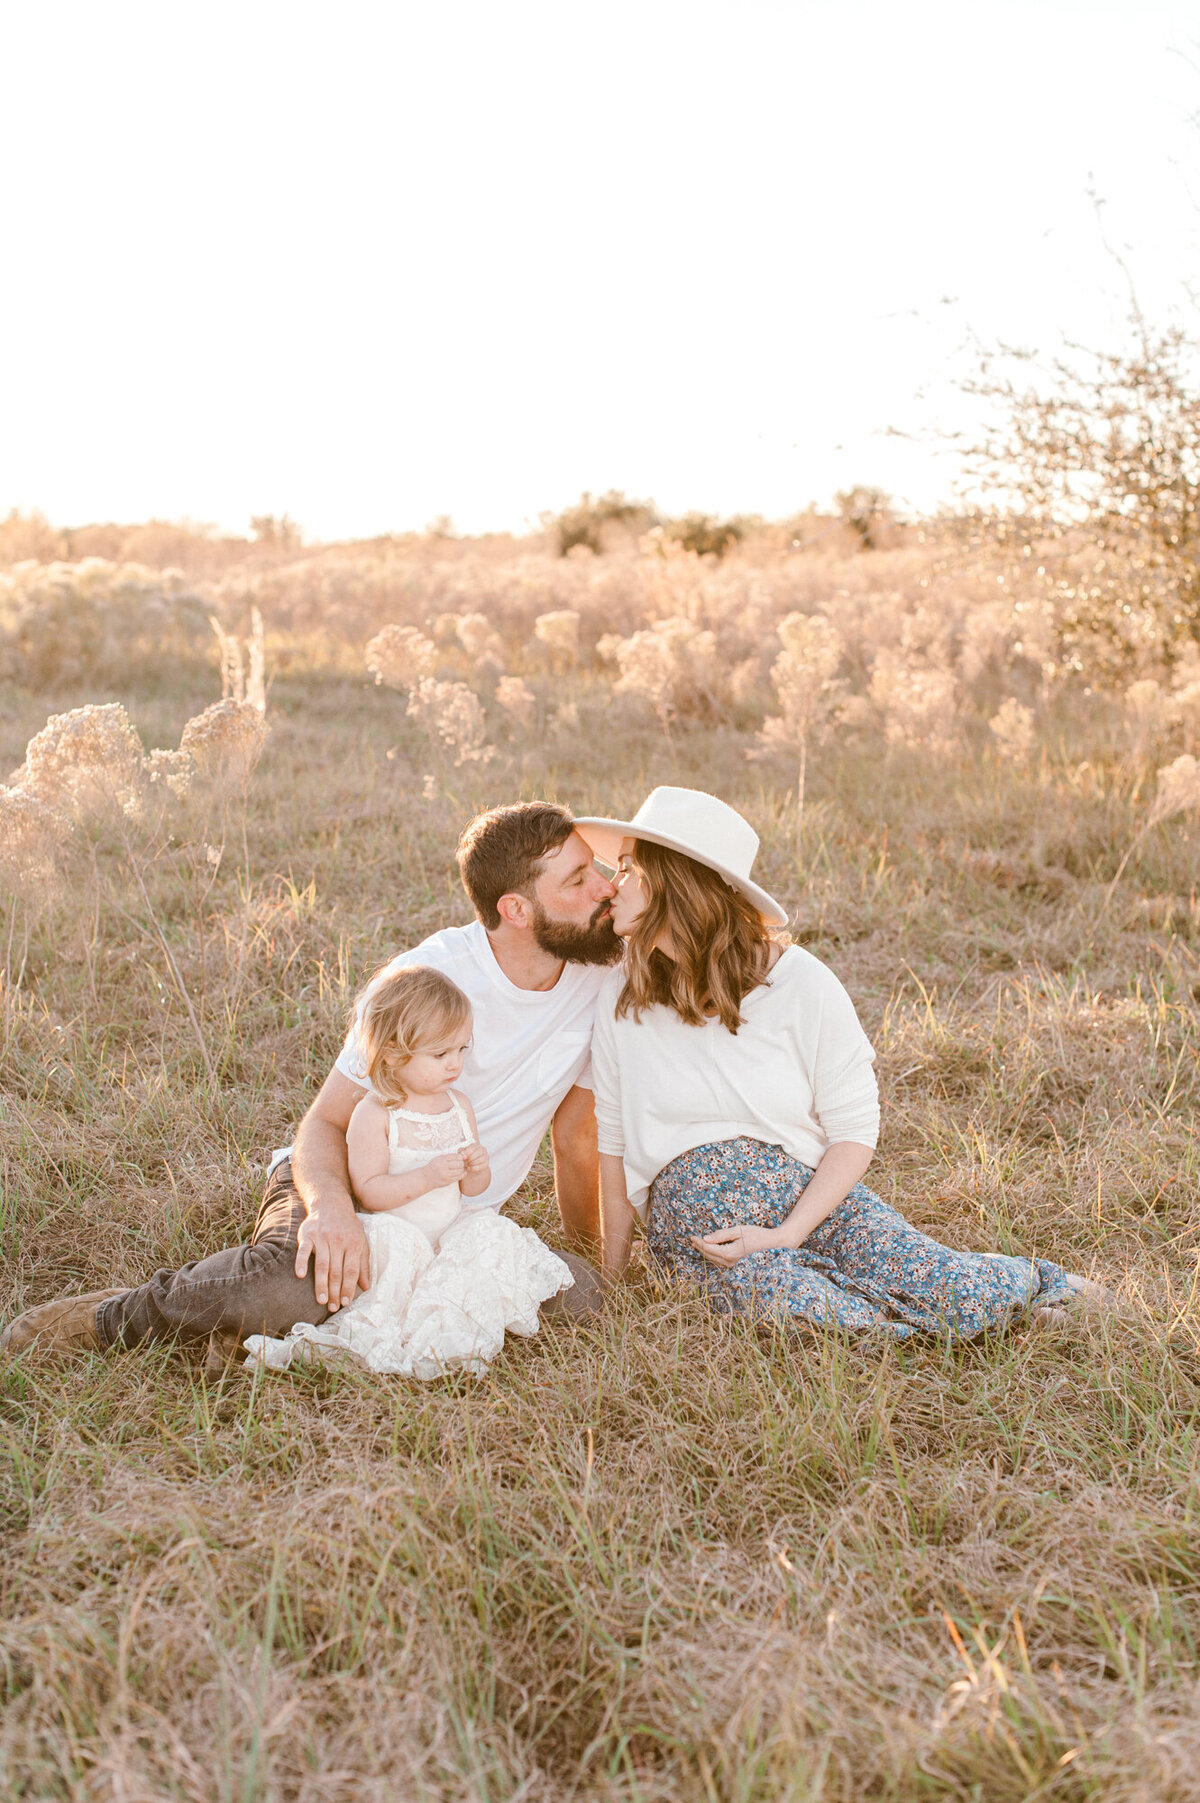 Orlando Maternity Photographer captures a kiss at sunset of soon to be parents sitting in a tall grass field.